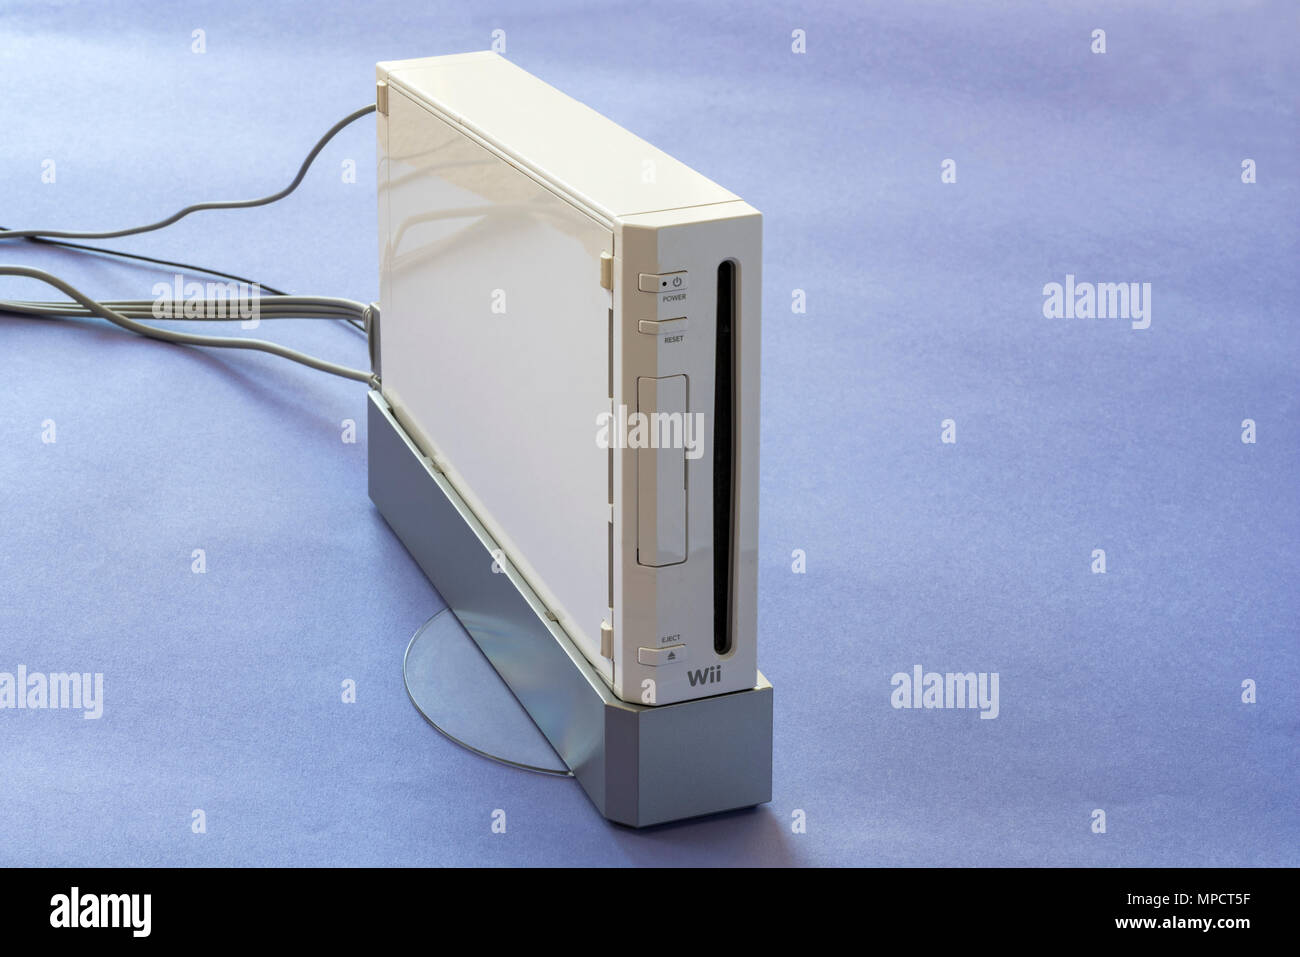 Nintendo Wii games console. Stock Photo